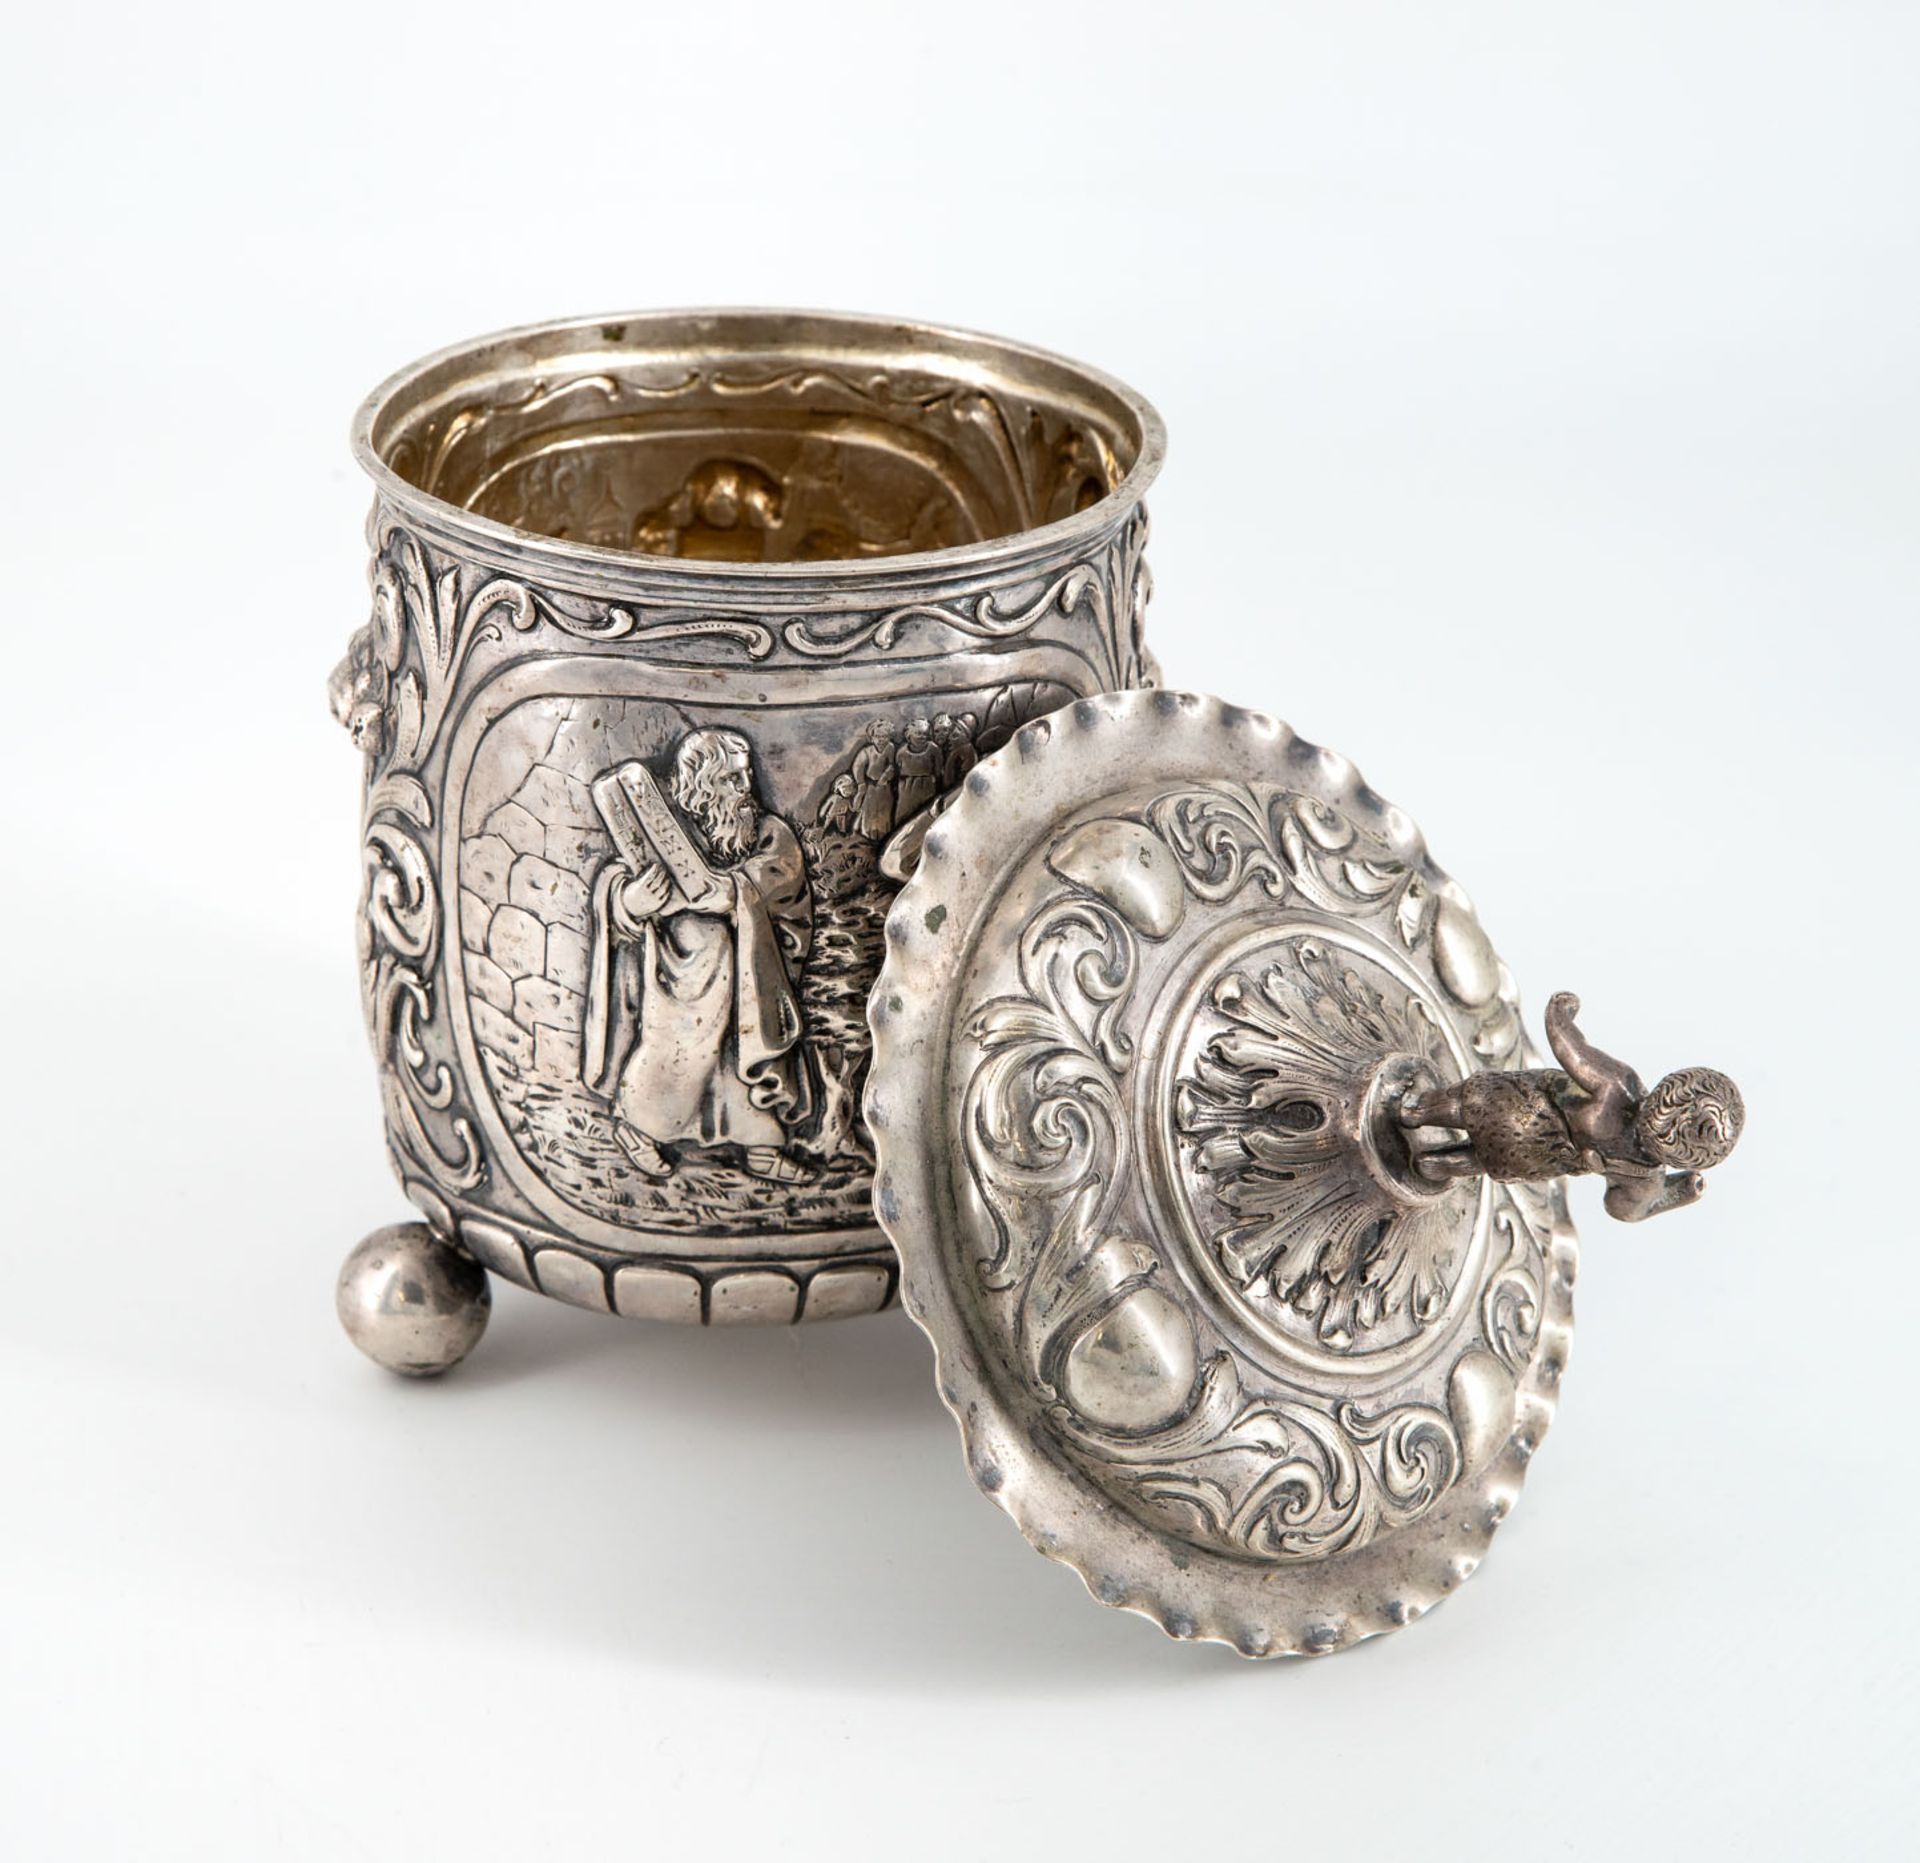 A Fine Silver Lidded Becher, Prob. Netherlands, 17/18th Century - Image 4 of 5